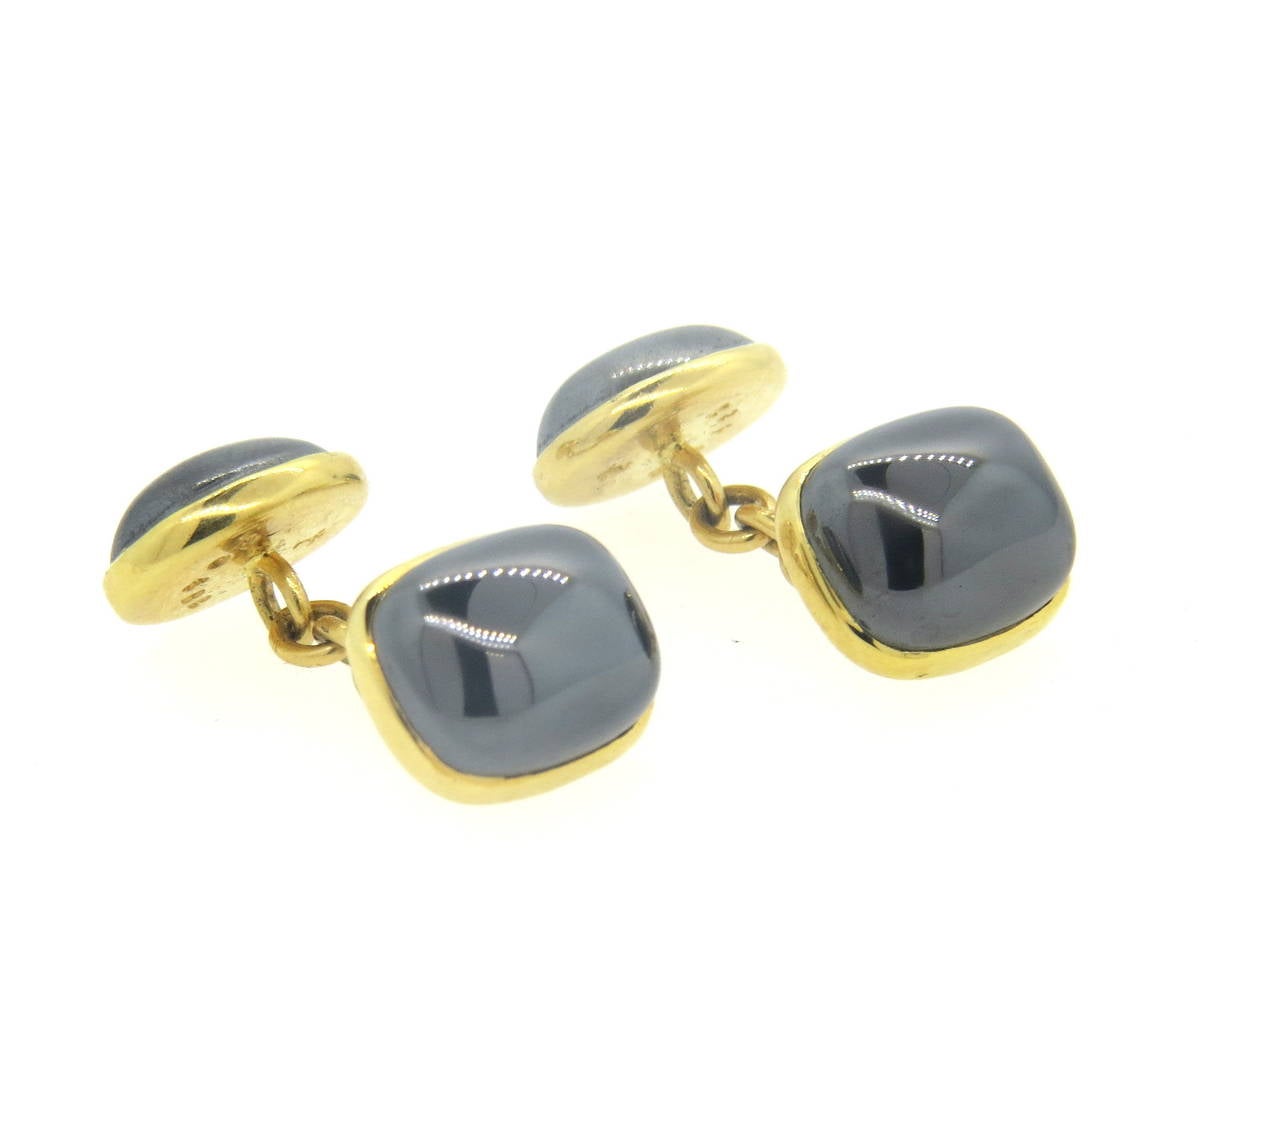 Pair of 18k yellow gold cufflinks, crafted by Trianon, set with hematite stones. Top measures 14mm x 11mm, oval back - 13mm x 10mm. Marked Trianon, 750,29482. Weight - 12.5 grams
Retail $2700